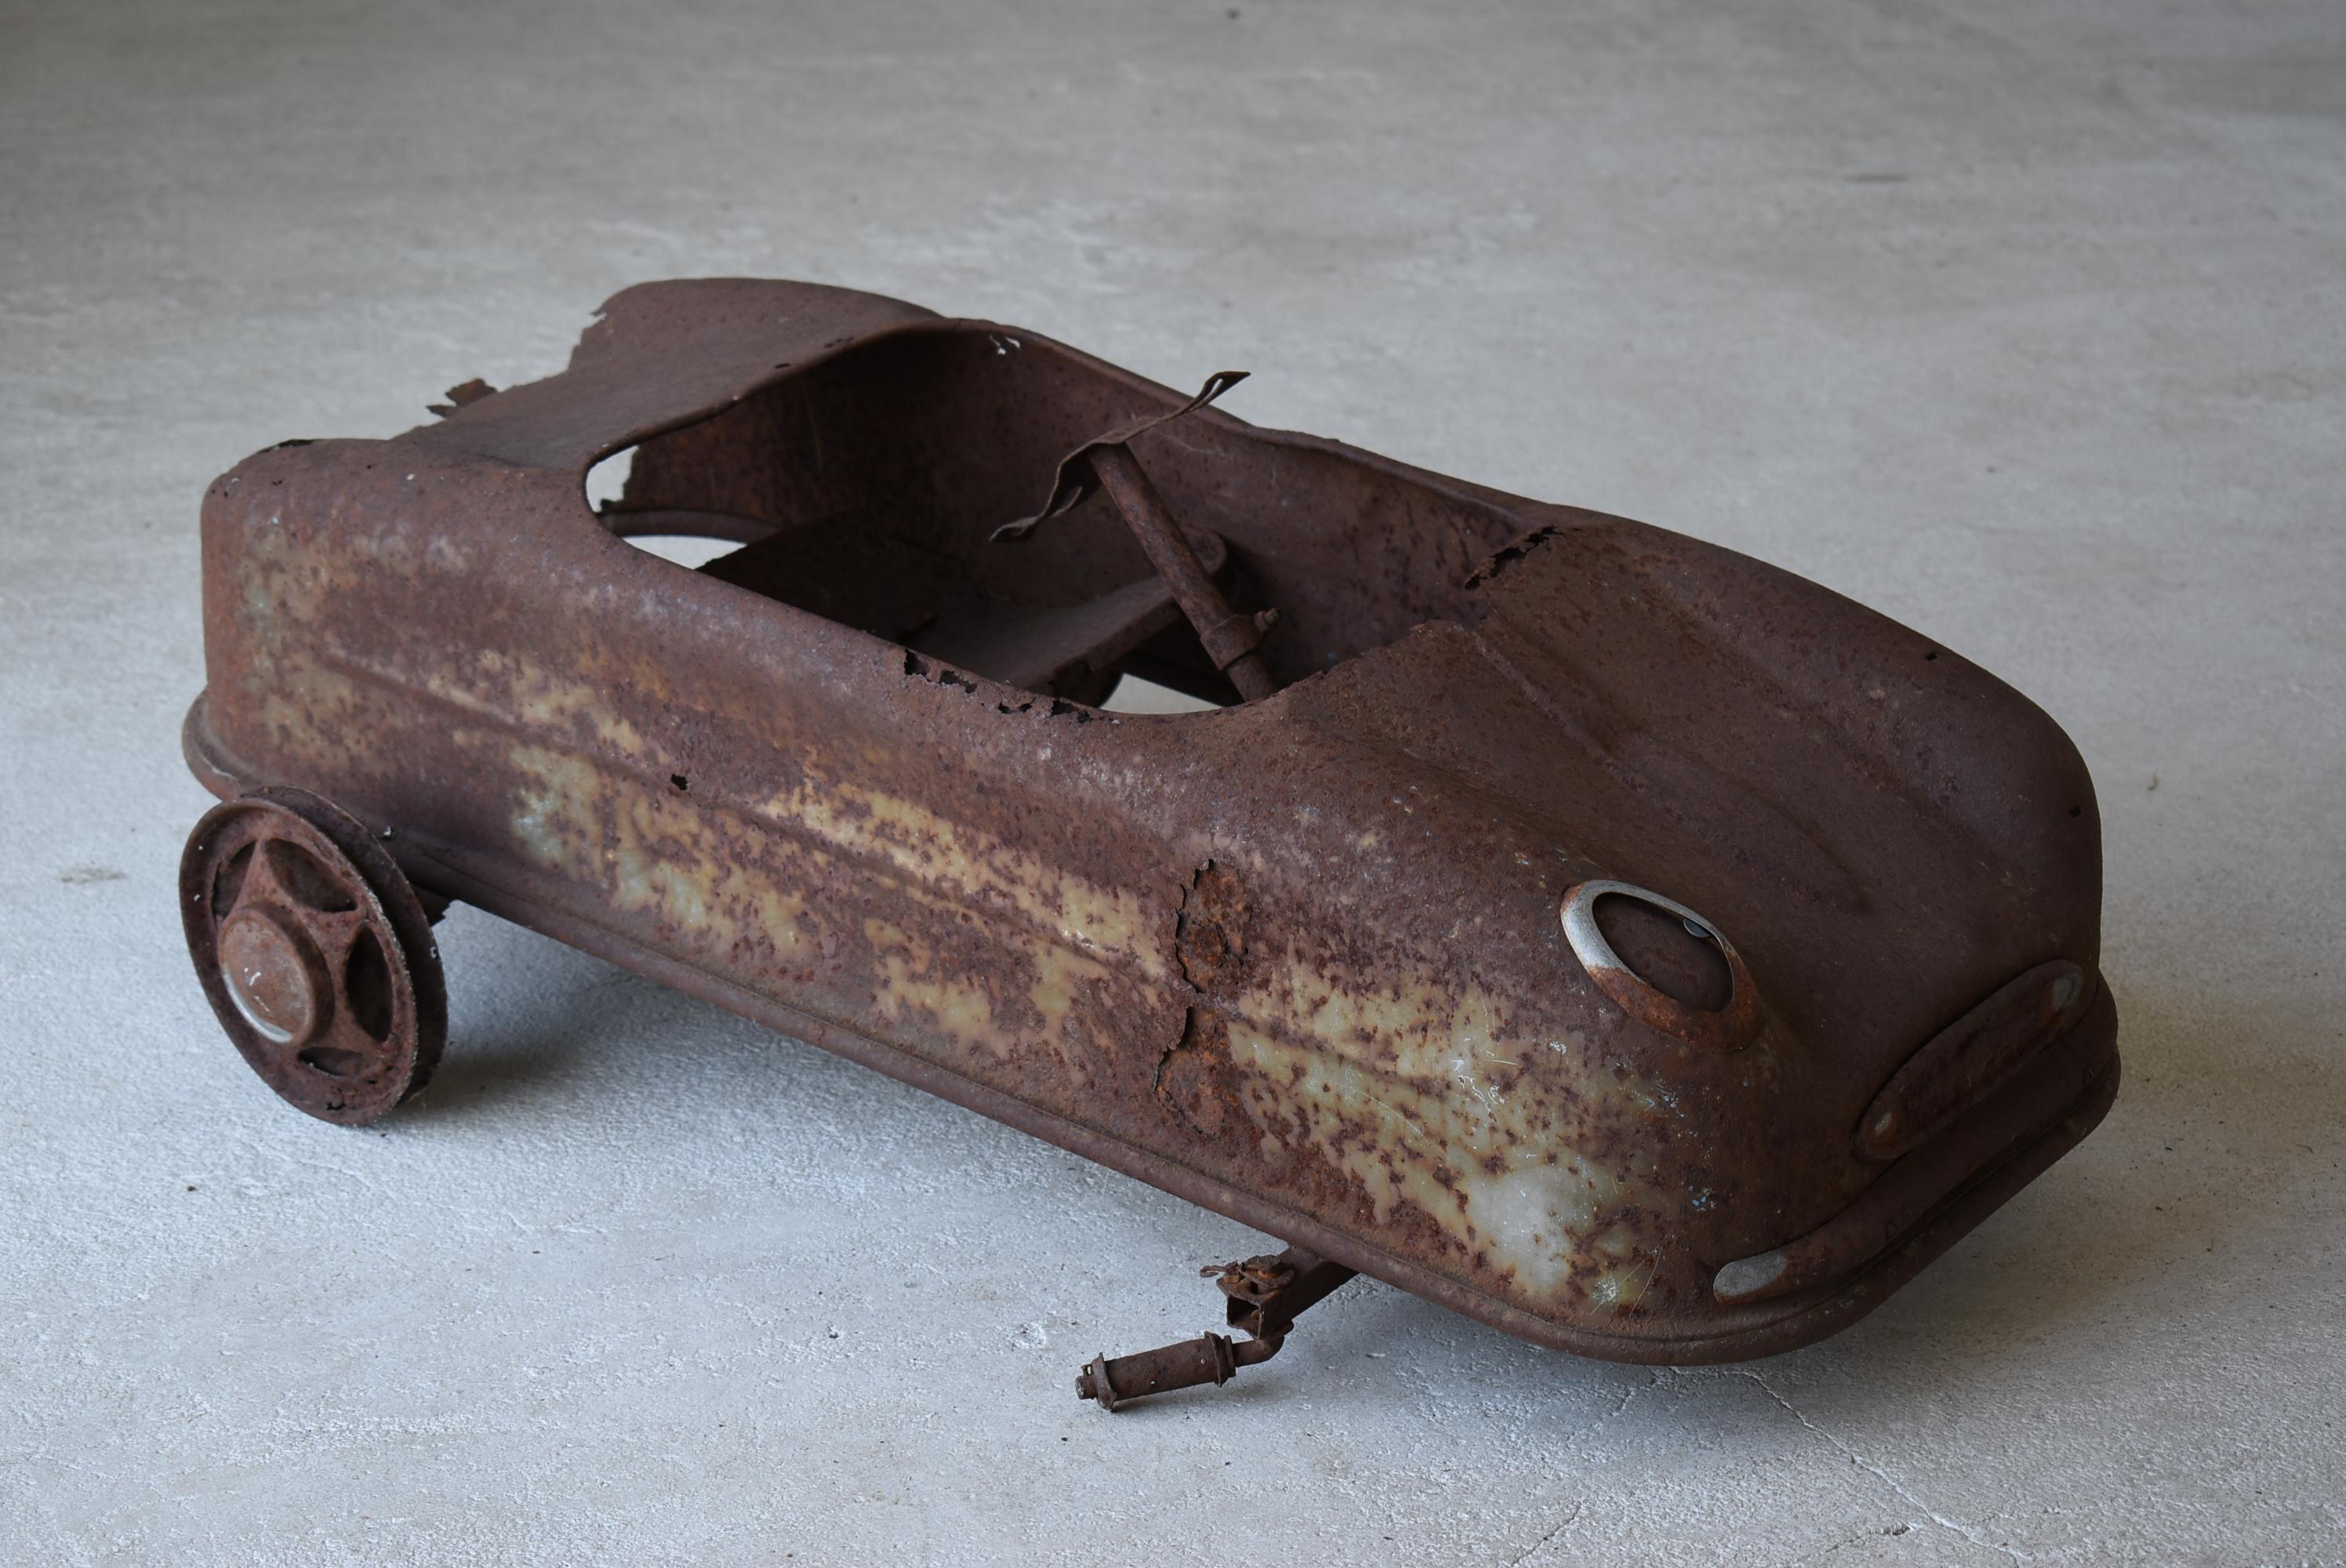 An old Japanese rusty car toy.
It is an item from 1940 to 1970.
It seems that it was left in the garden of an old folk house.

It is a miracle that this remains.
It has a presence comparable to famous works of art.

A unique work.
I highly recommend